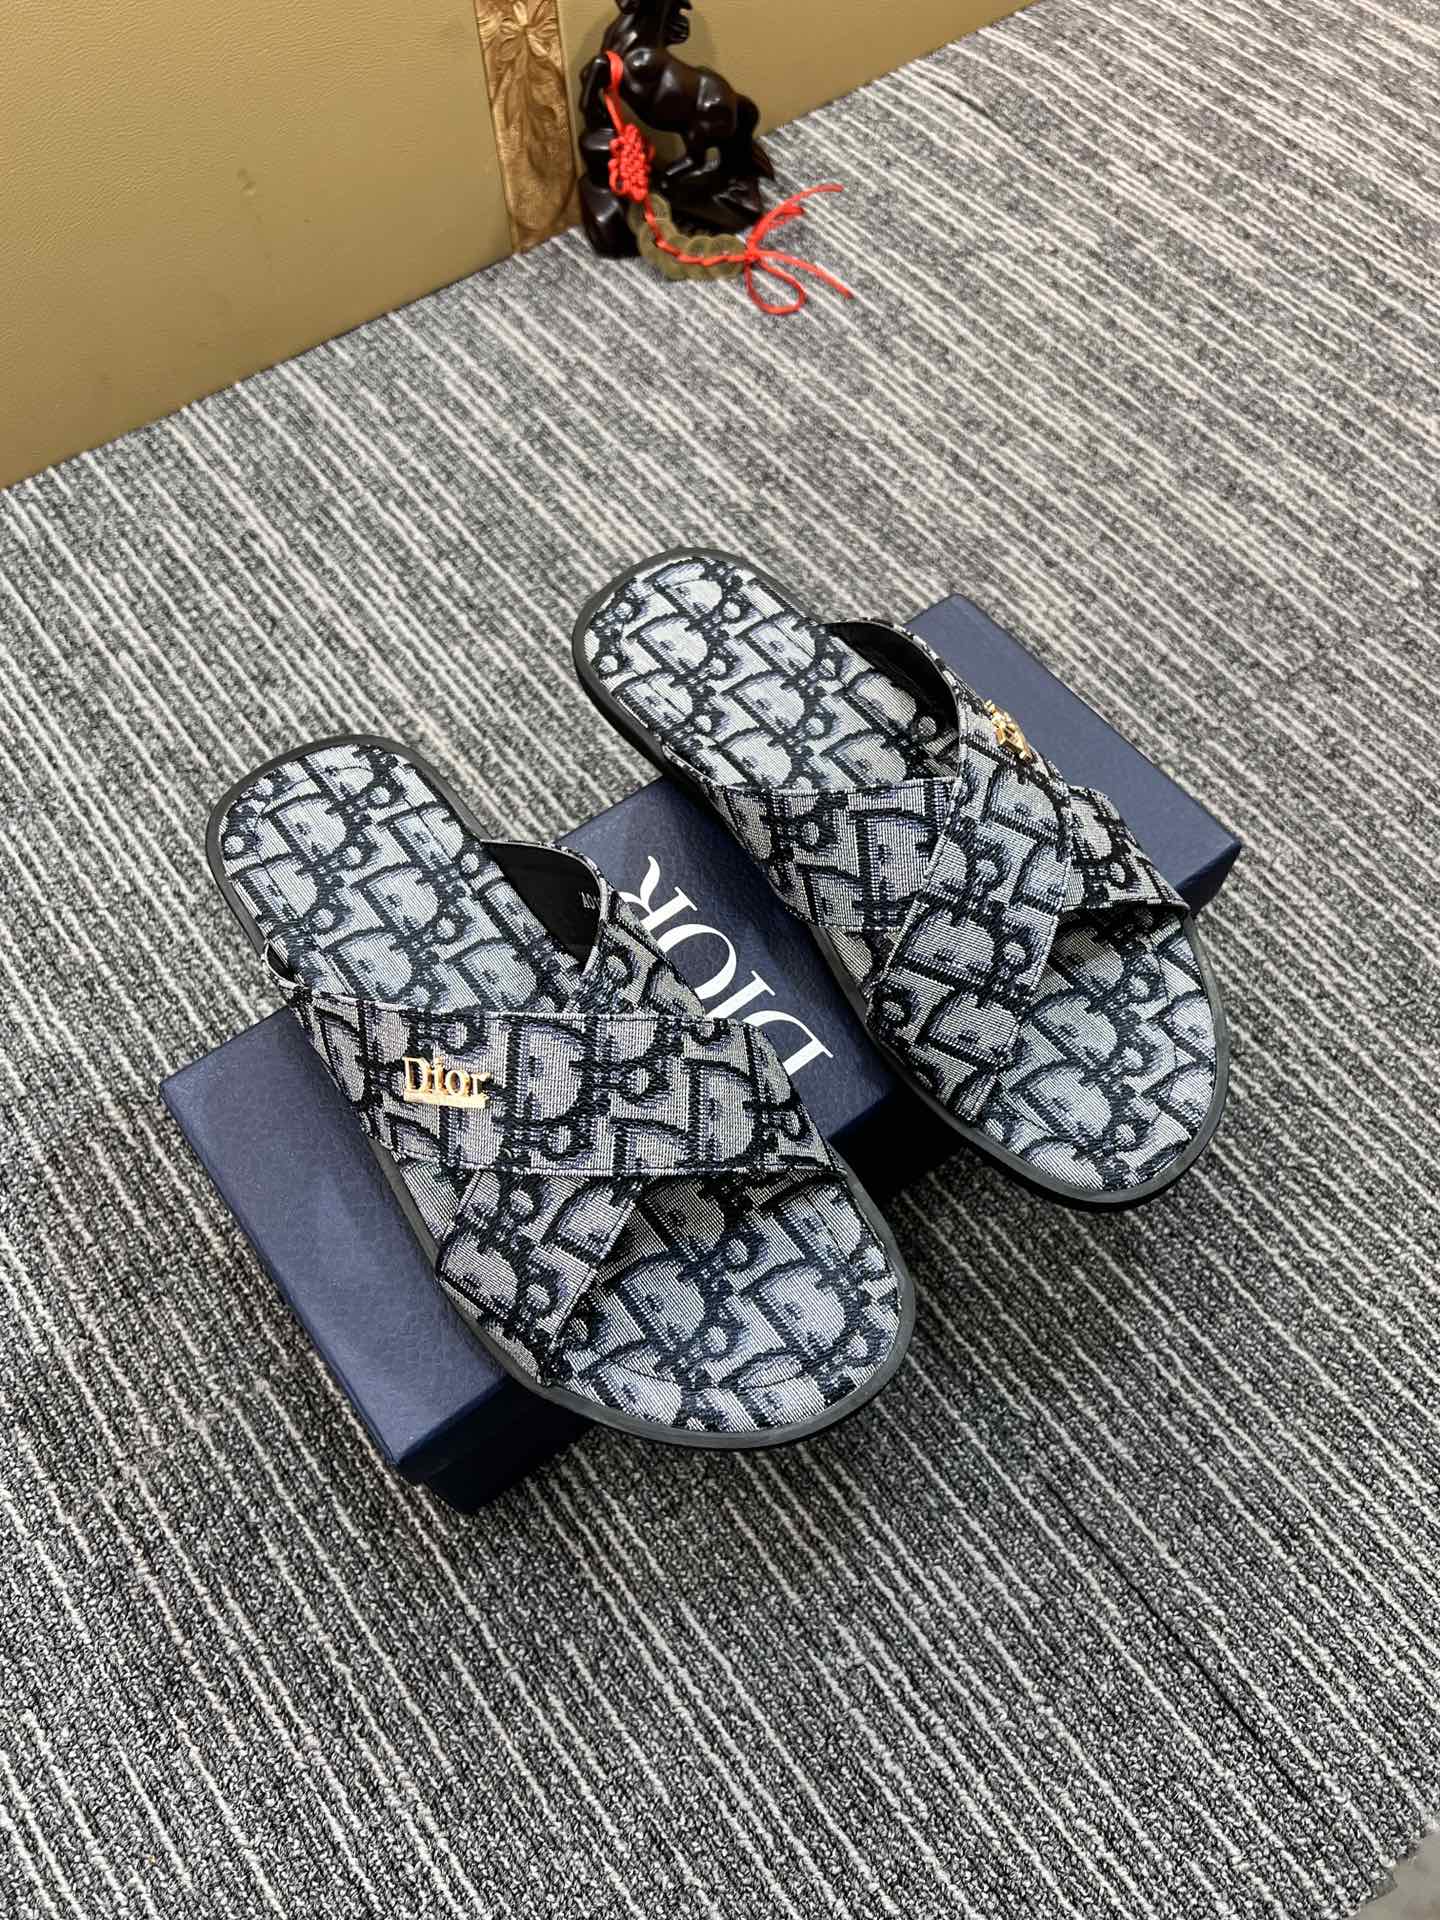 Dior Shoes Slippers Shop the Best High Authentic Quality Replica
 Men Cowhide Fabric Rubber Sheepskin